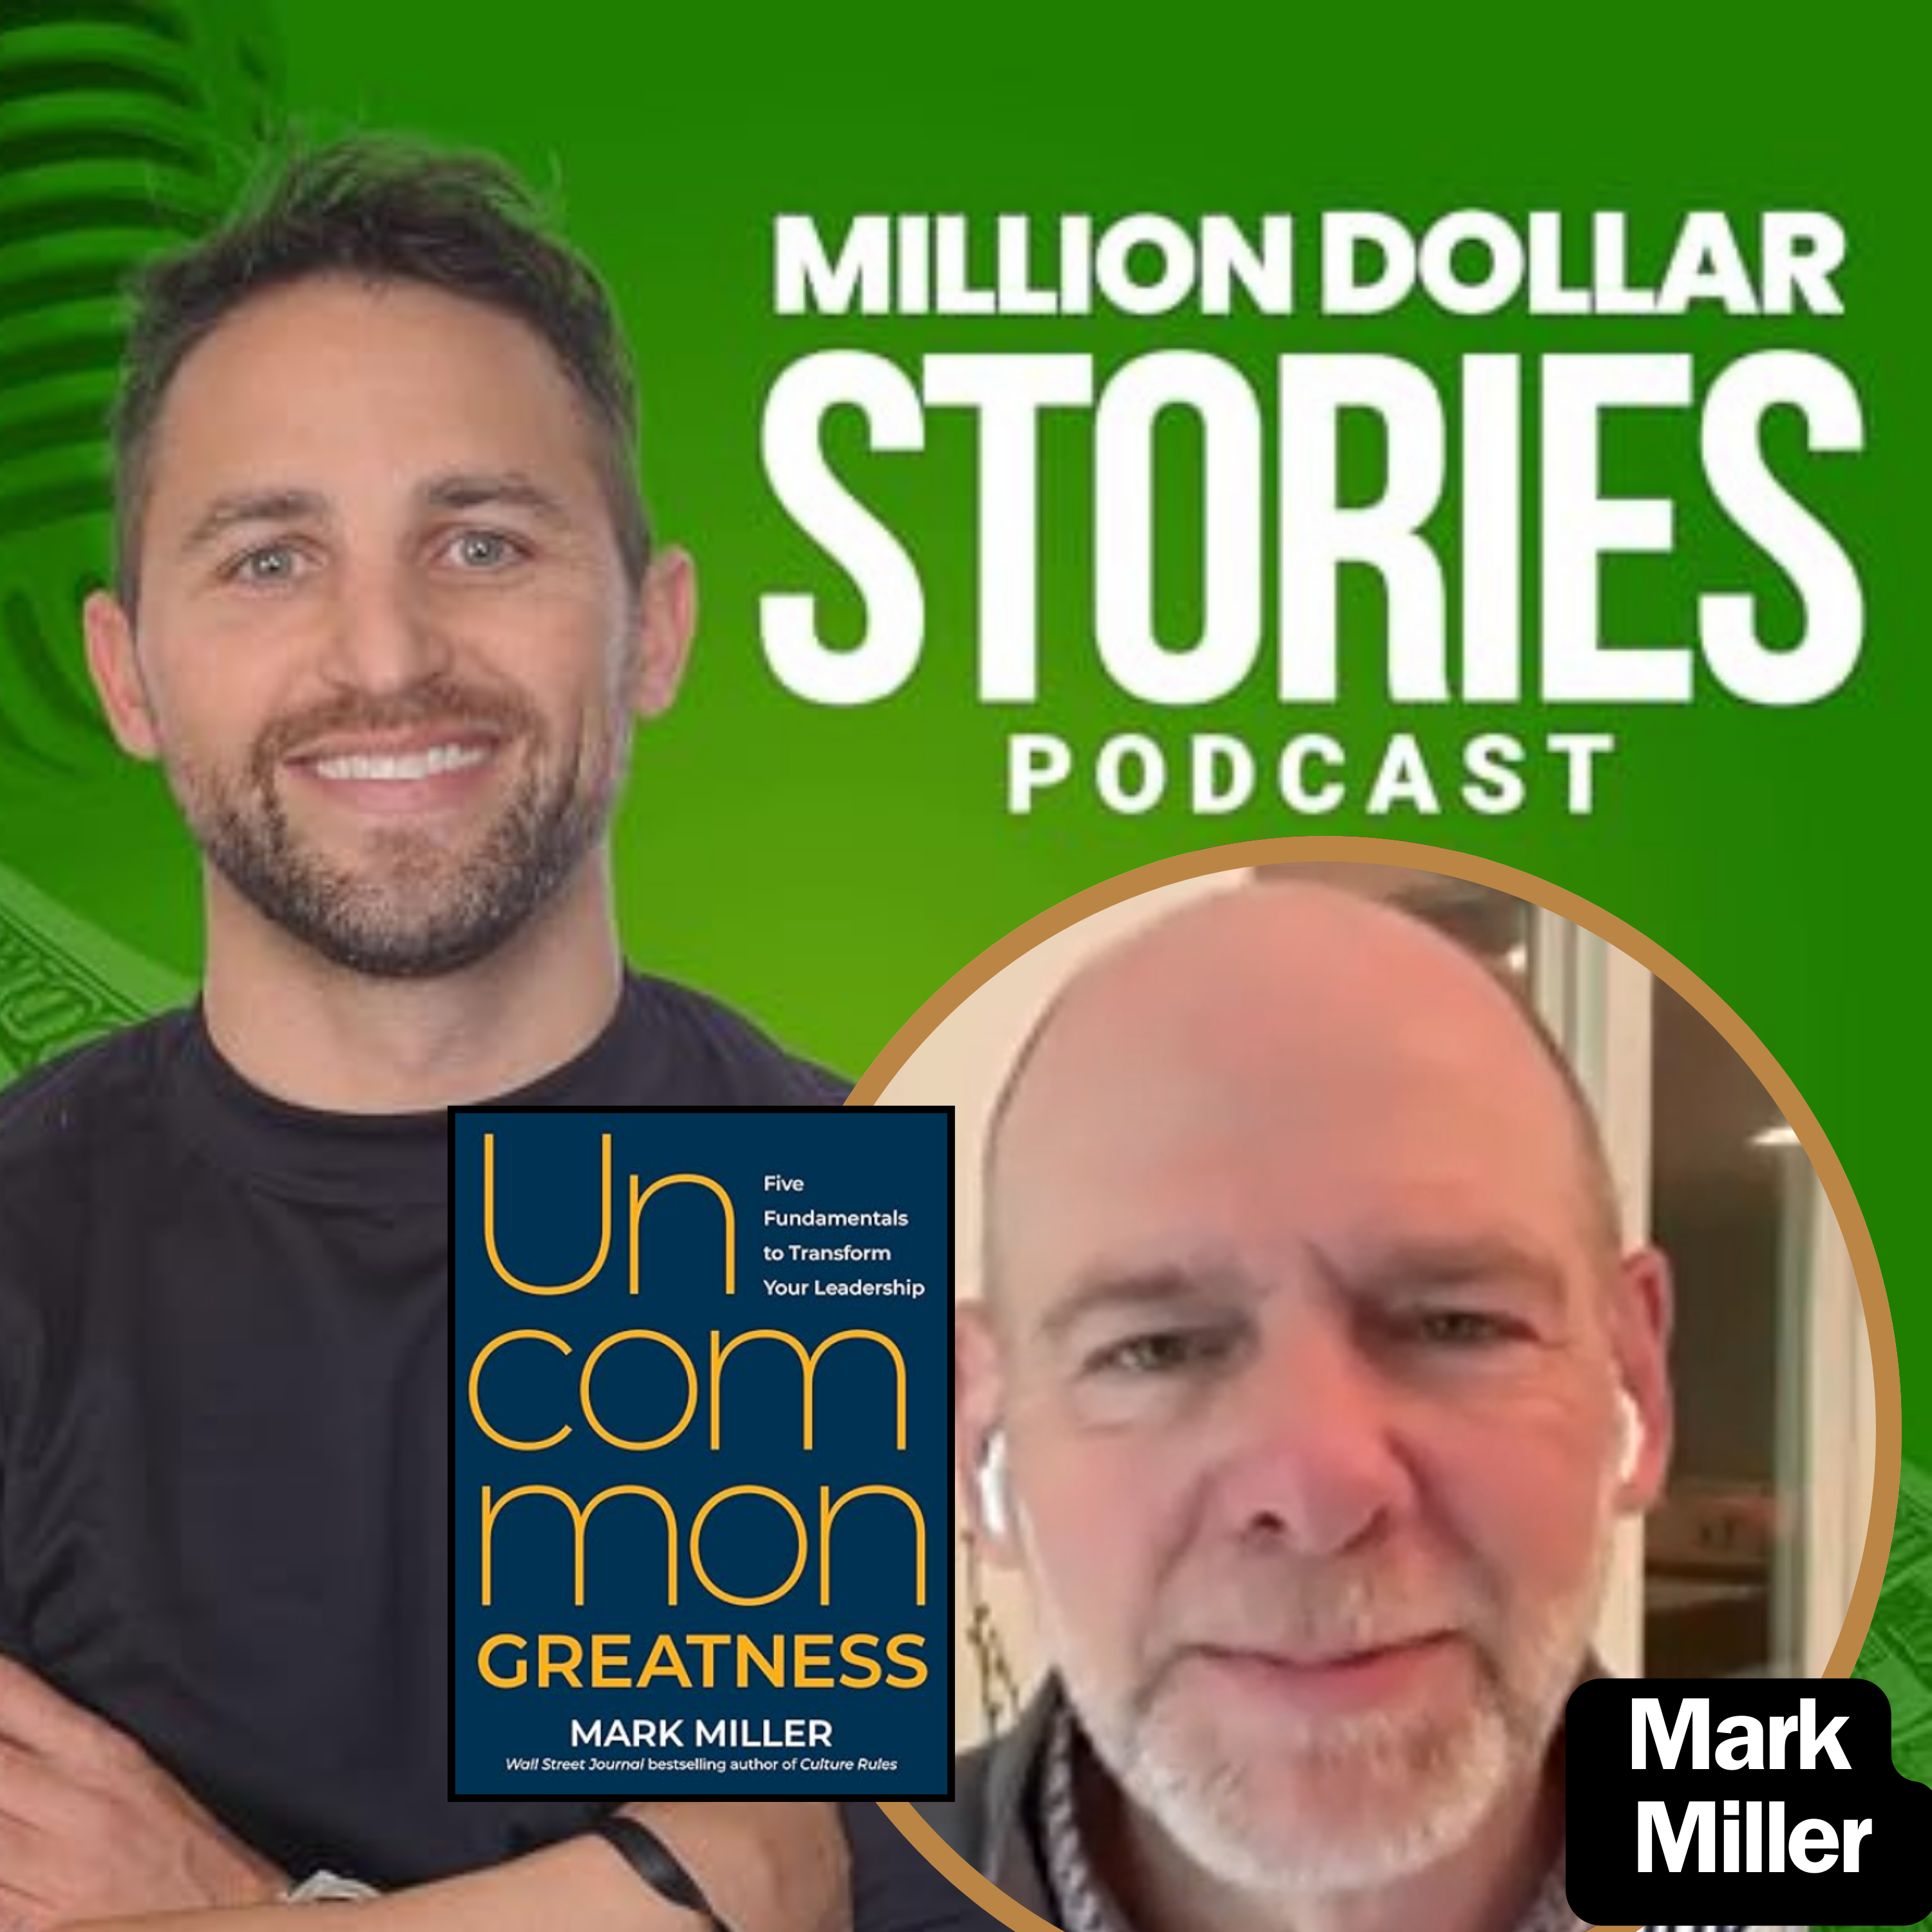 Mark Miller – Author of “Uncommon Greatness: Five Fundamentals to Transform Your Leadership”